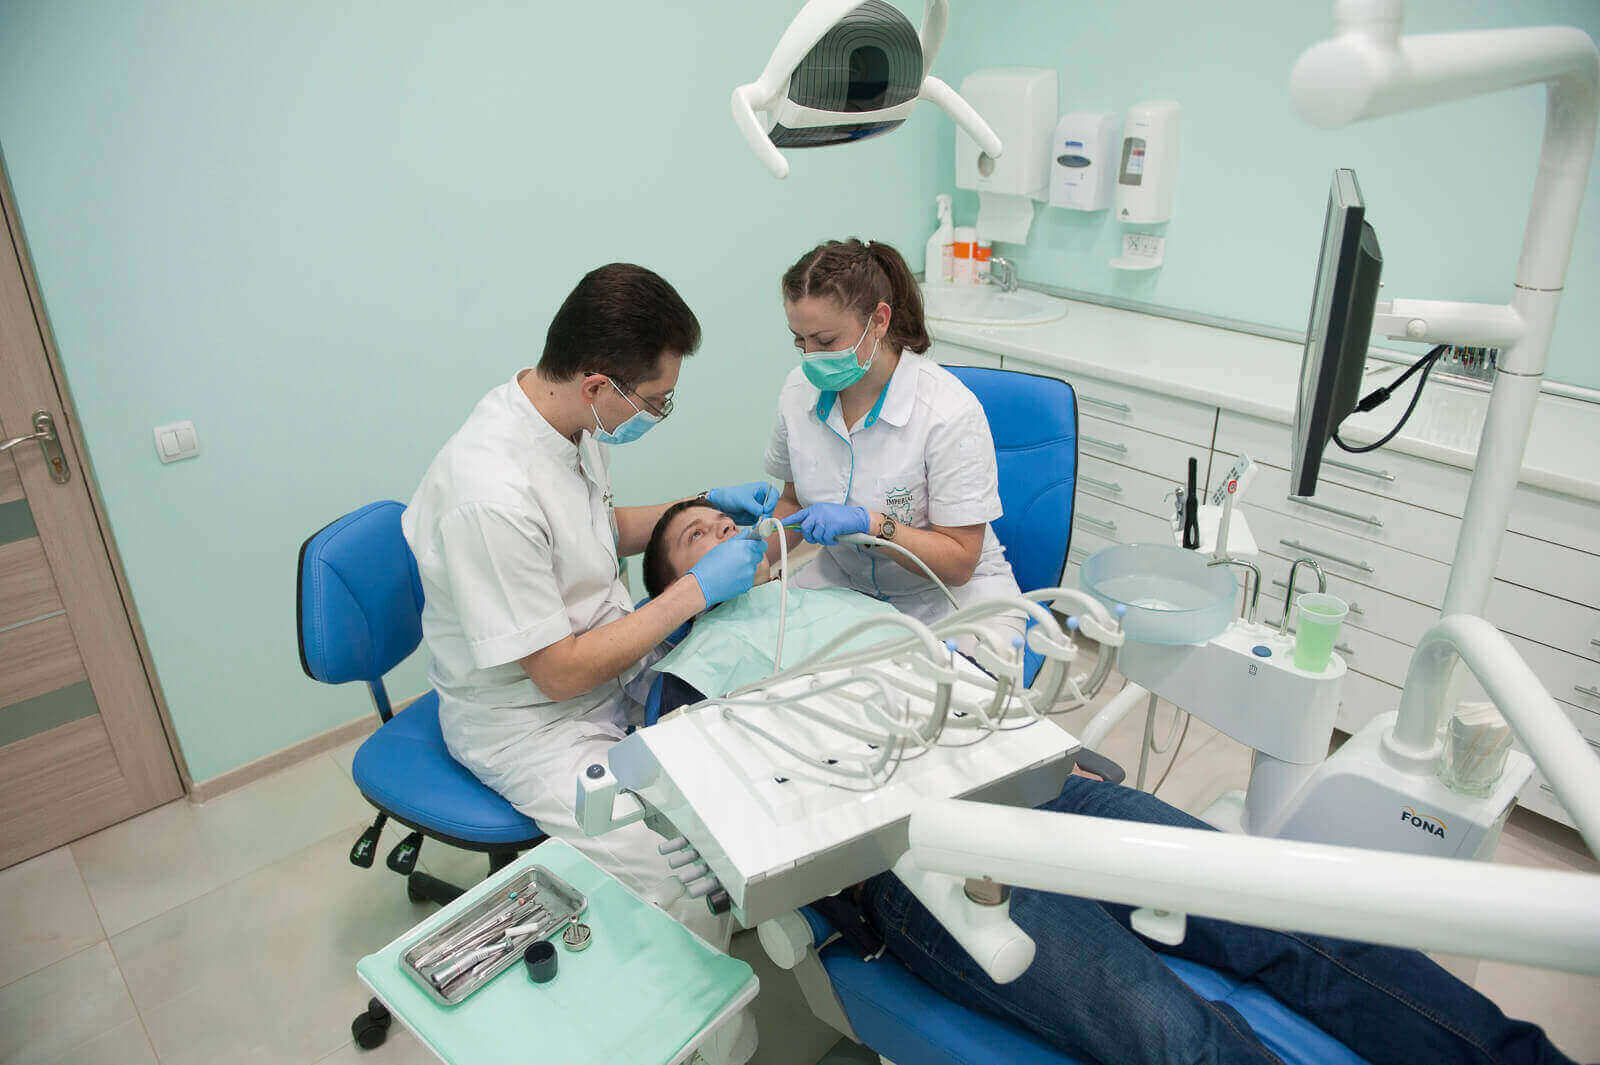 Odontology - treatment for caries and injuries of the teeth